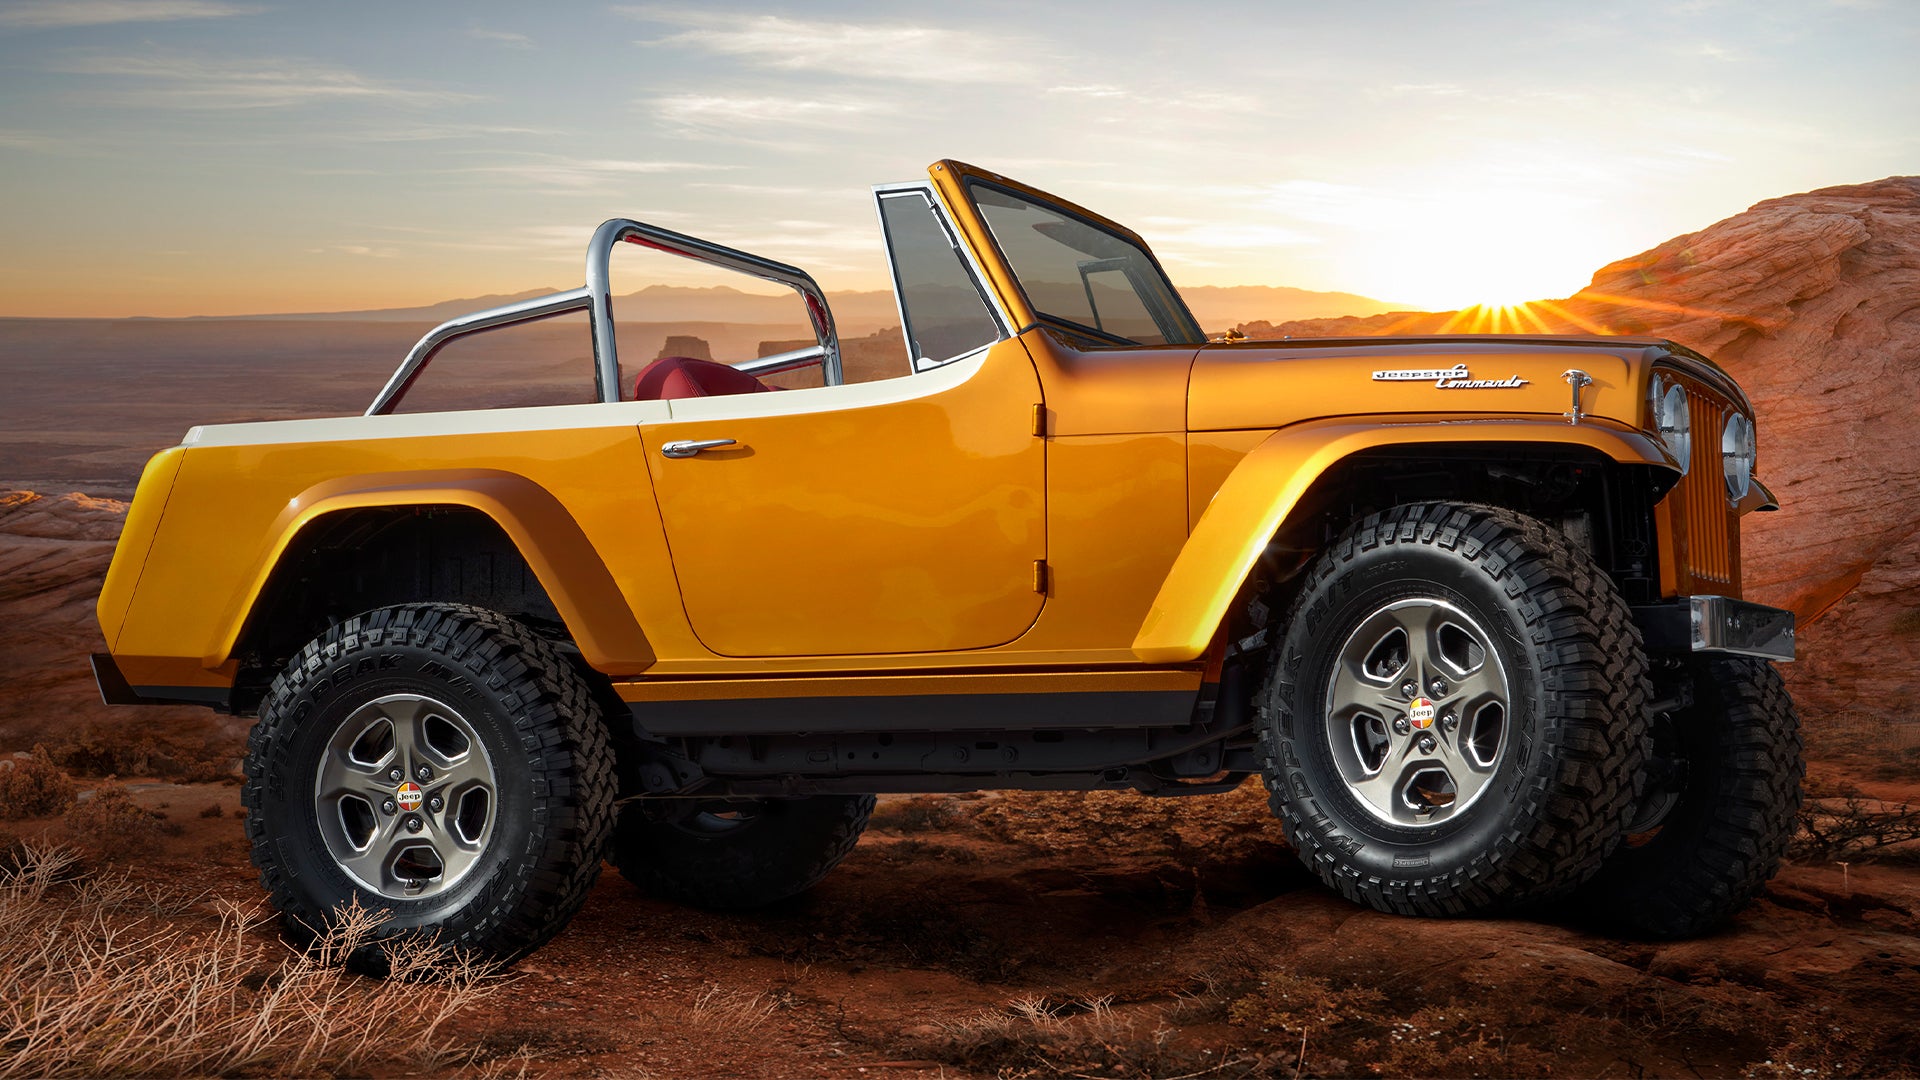 This Year’s Easter Jeep Safari Brings a Mix of Modern OffRoad Concepts